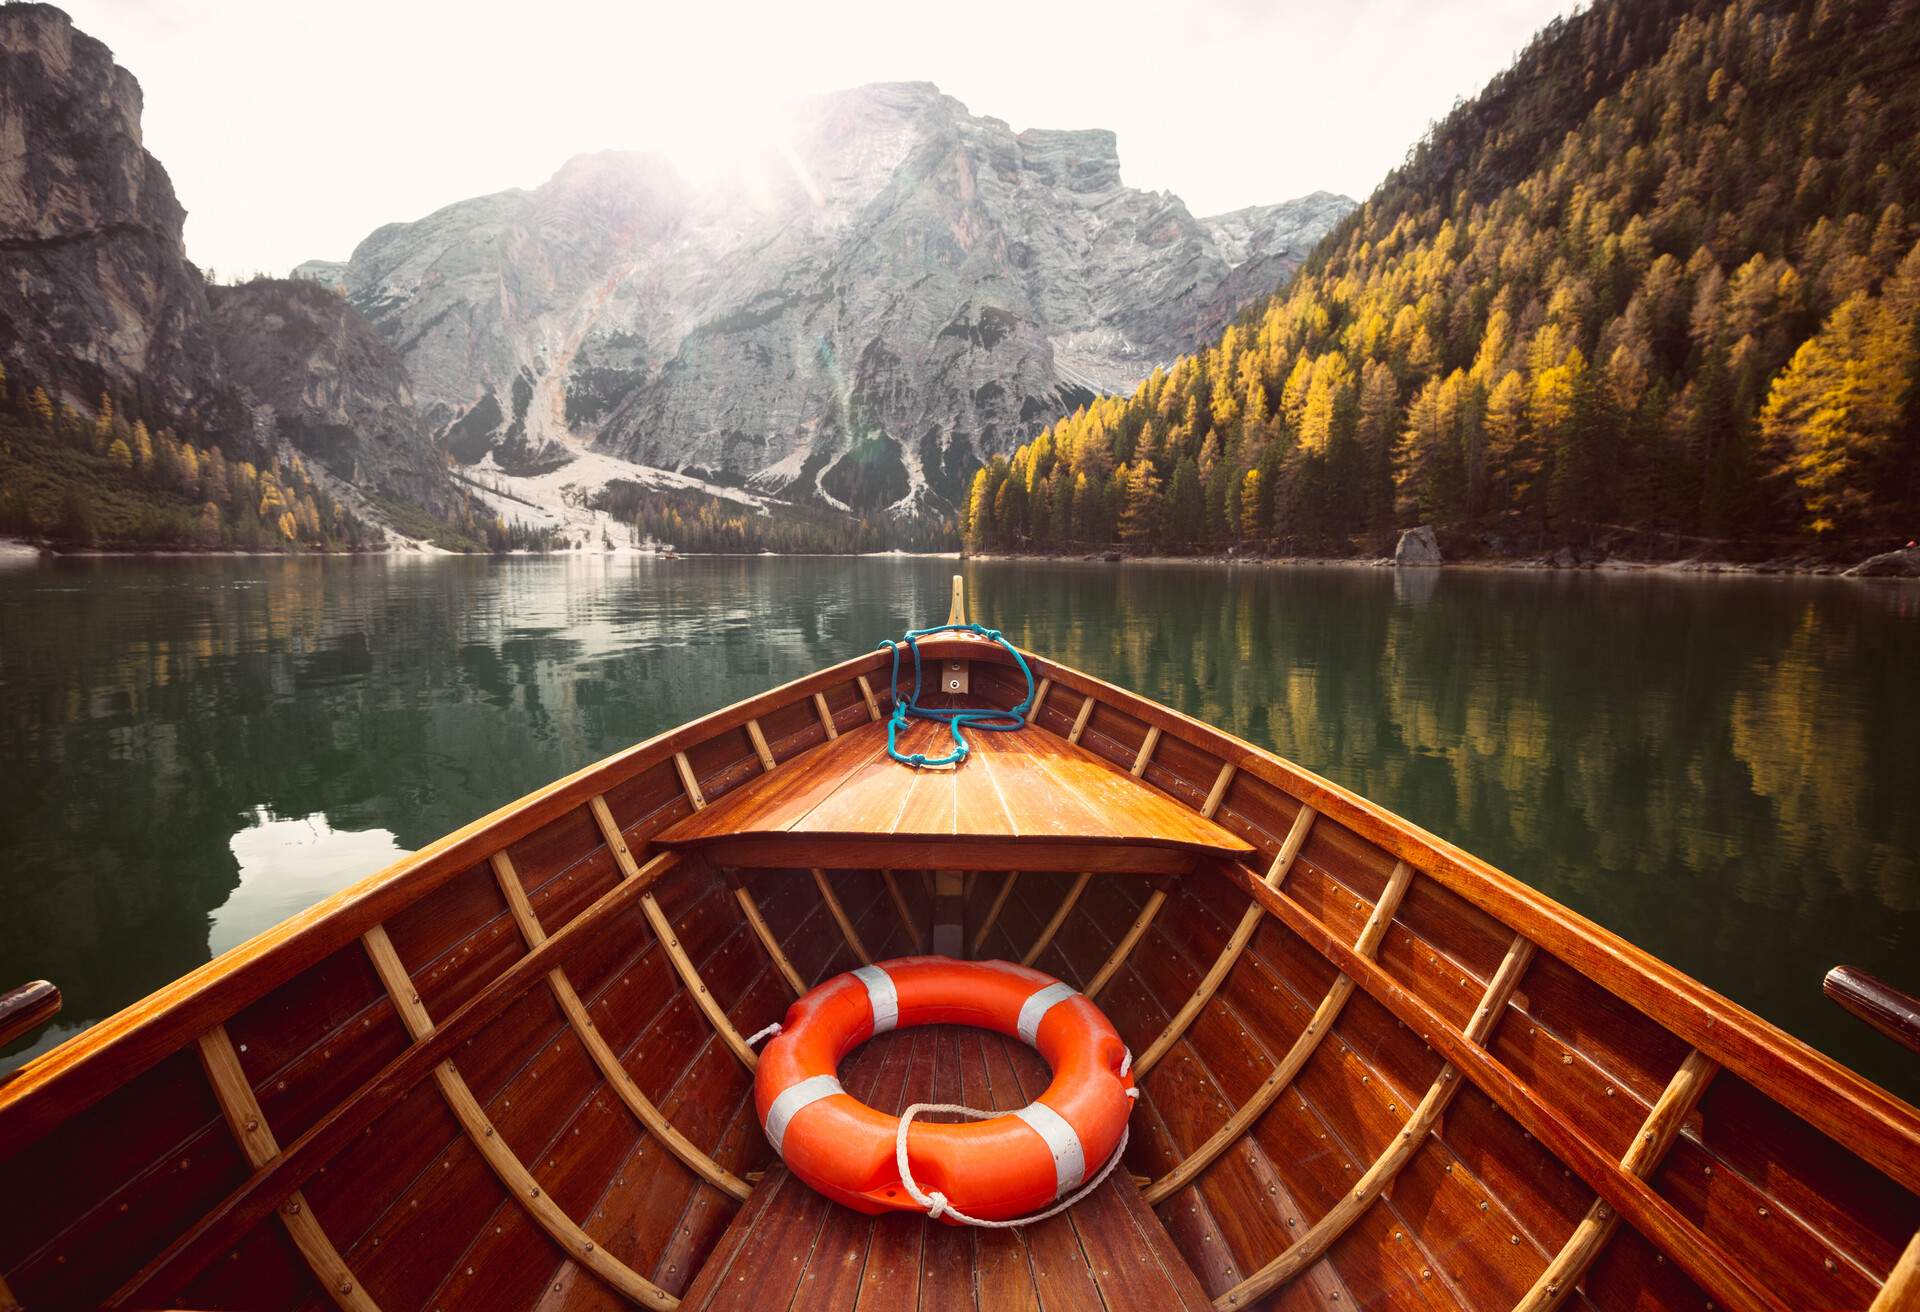 A wooden boat with an orange floater on a scenic tranquil lake lined with tall trees in autumn hues beneath the rocky mountains.